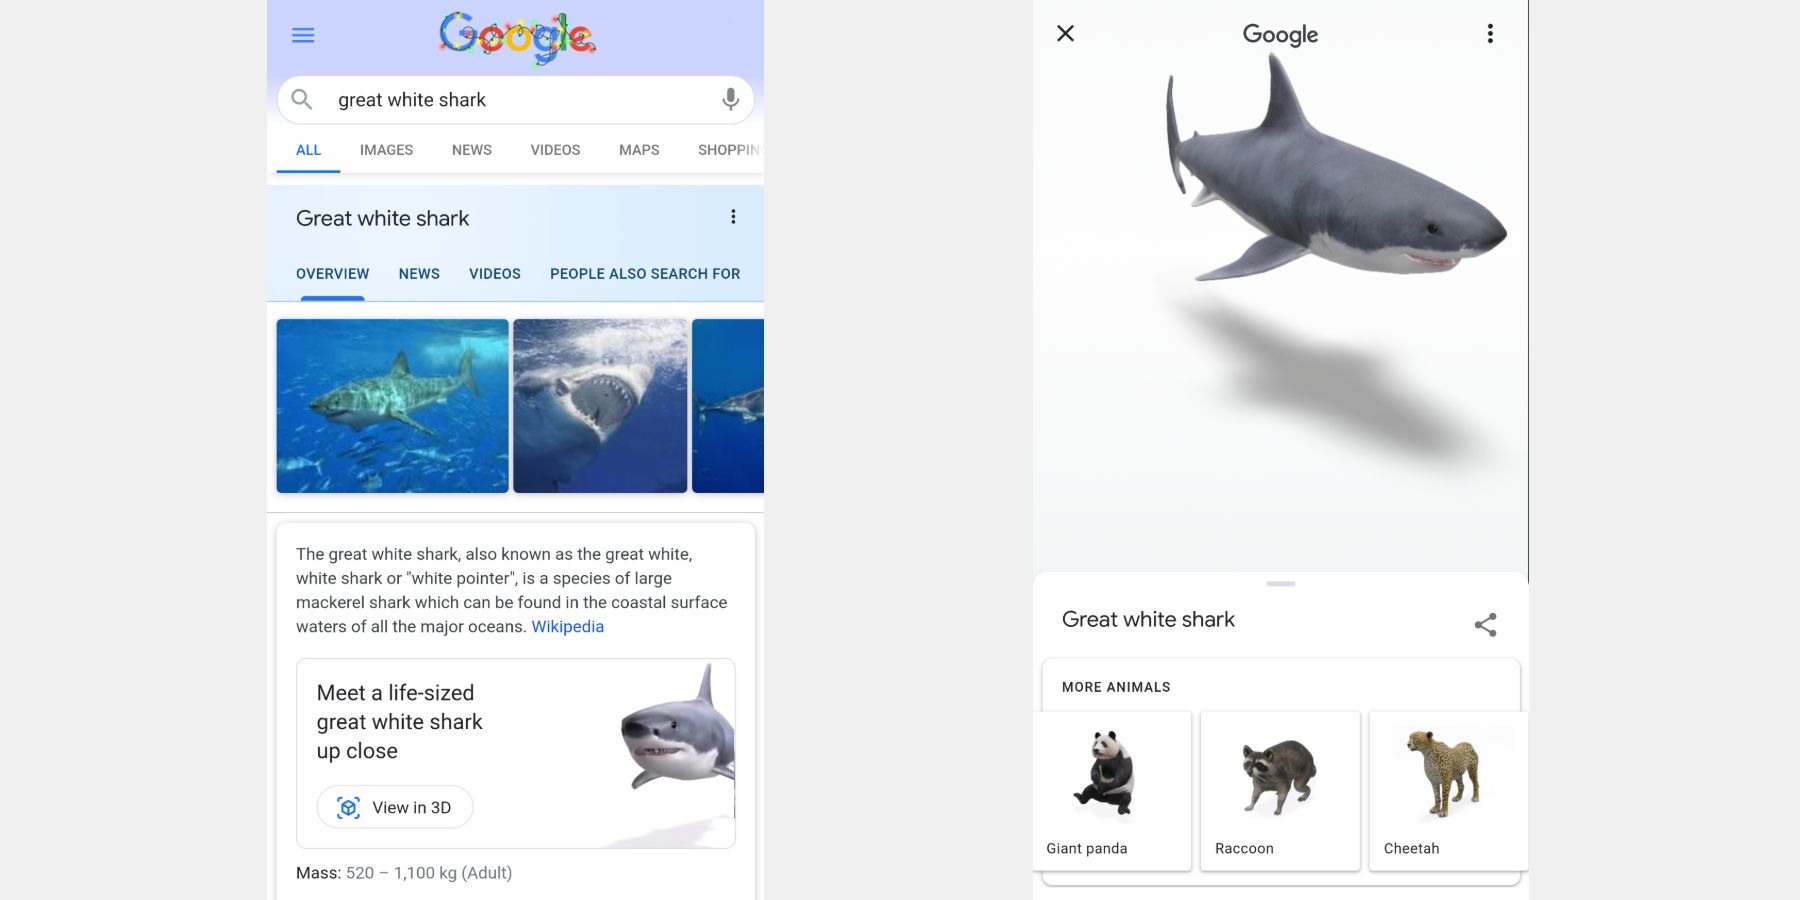 Great white shark Google search results and 3D AR viewer